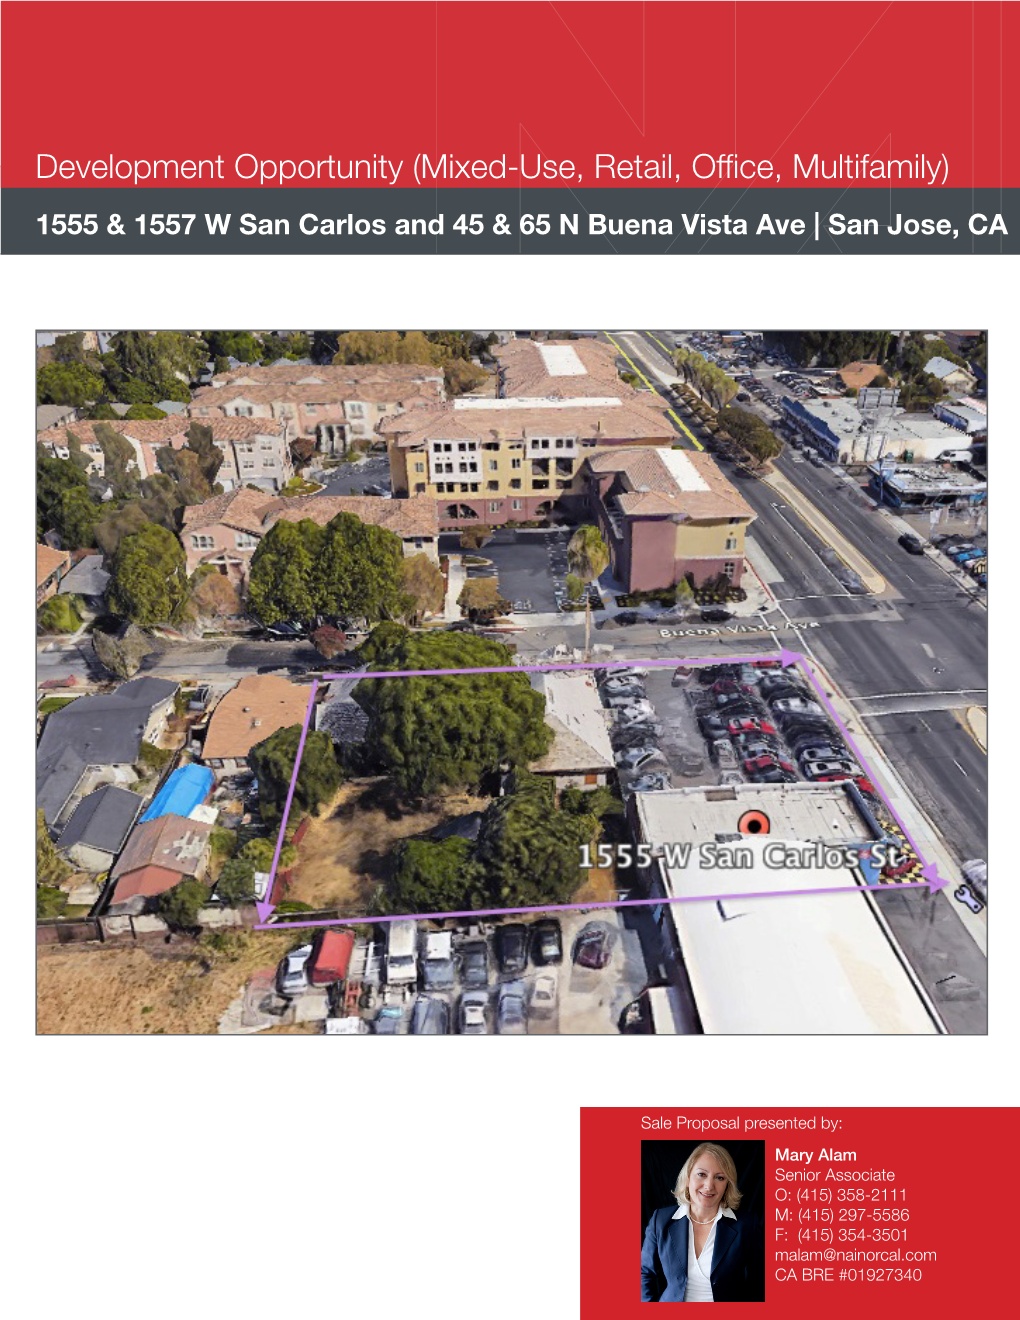 Development Opportunity (Mixed-Use, Retail, Office, Multifamily) 1555 & 1557 W San Carlos and 45 & 65 N Buena Vista Ave | San Jose, CA